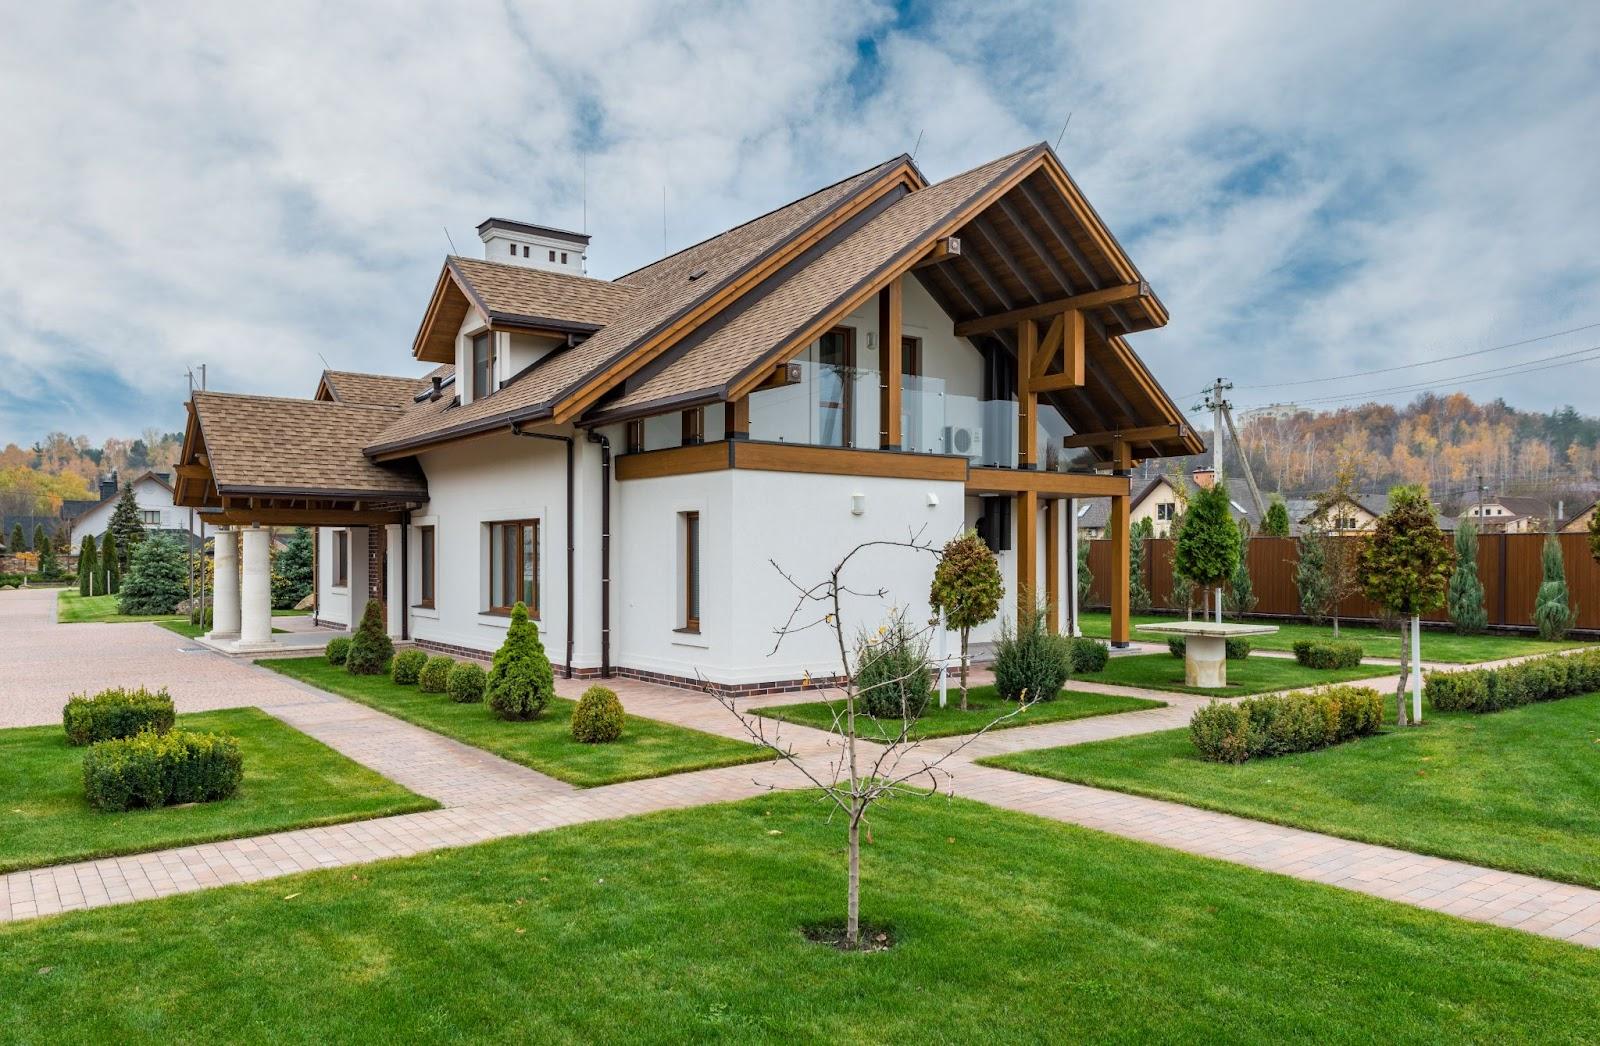 7 Ideas on How to Remodel a Ranch Style House